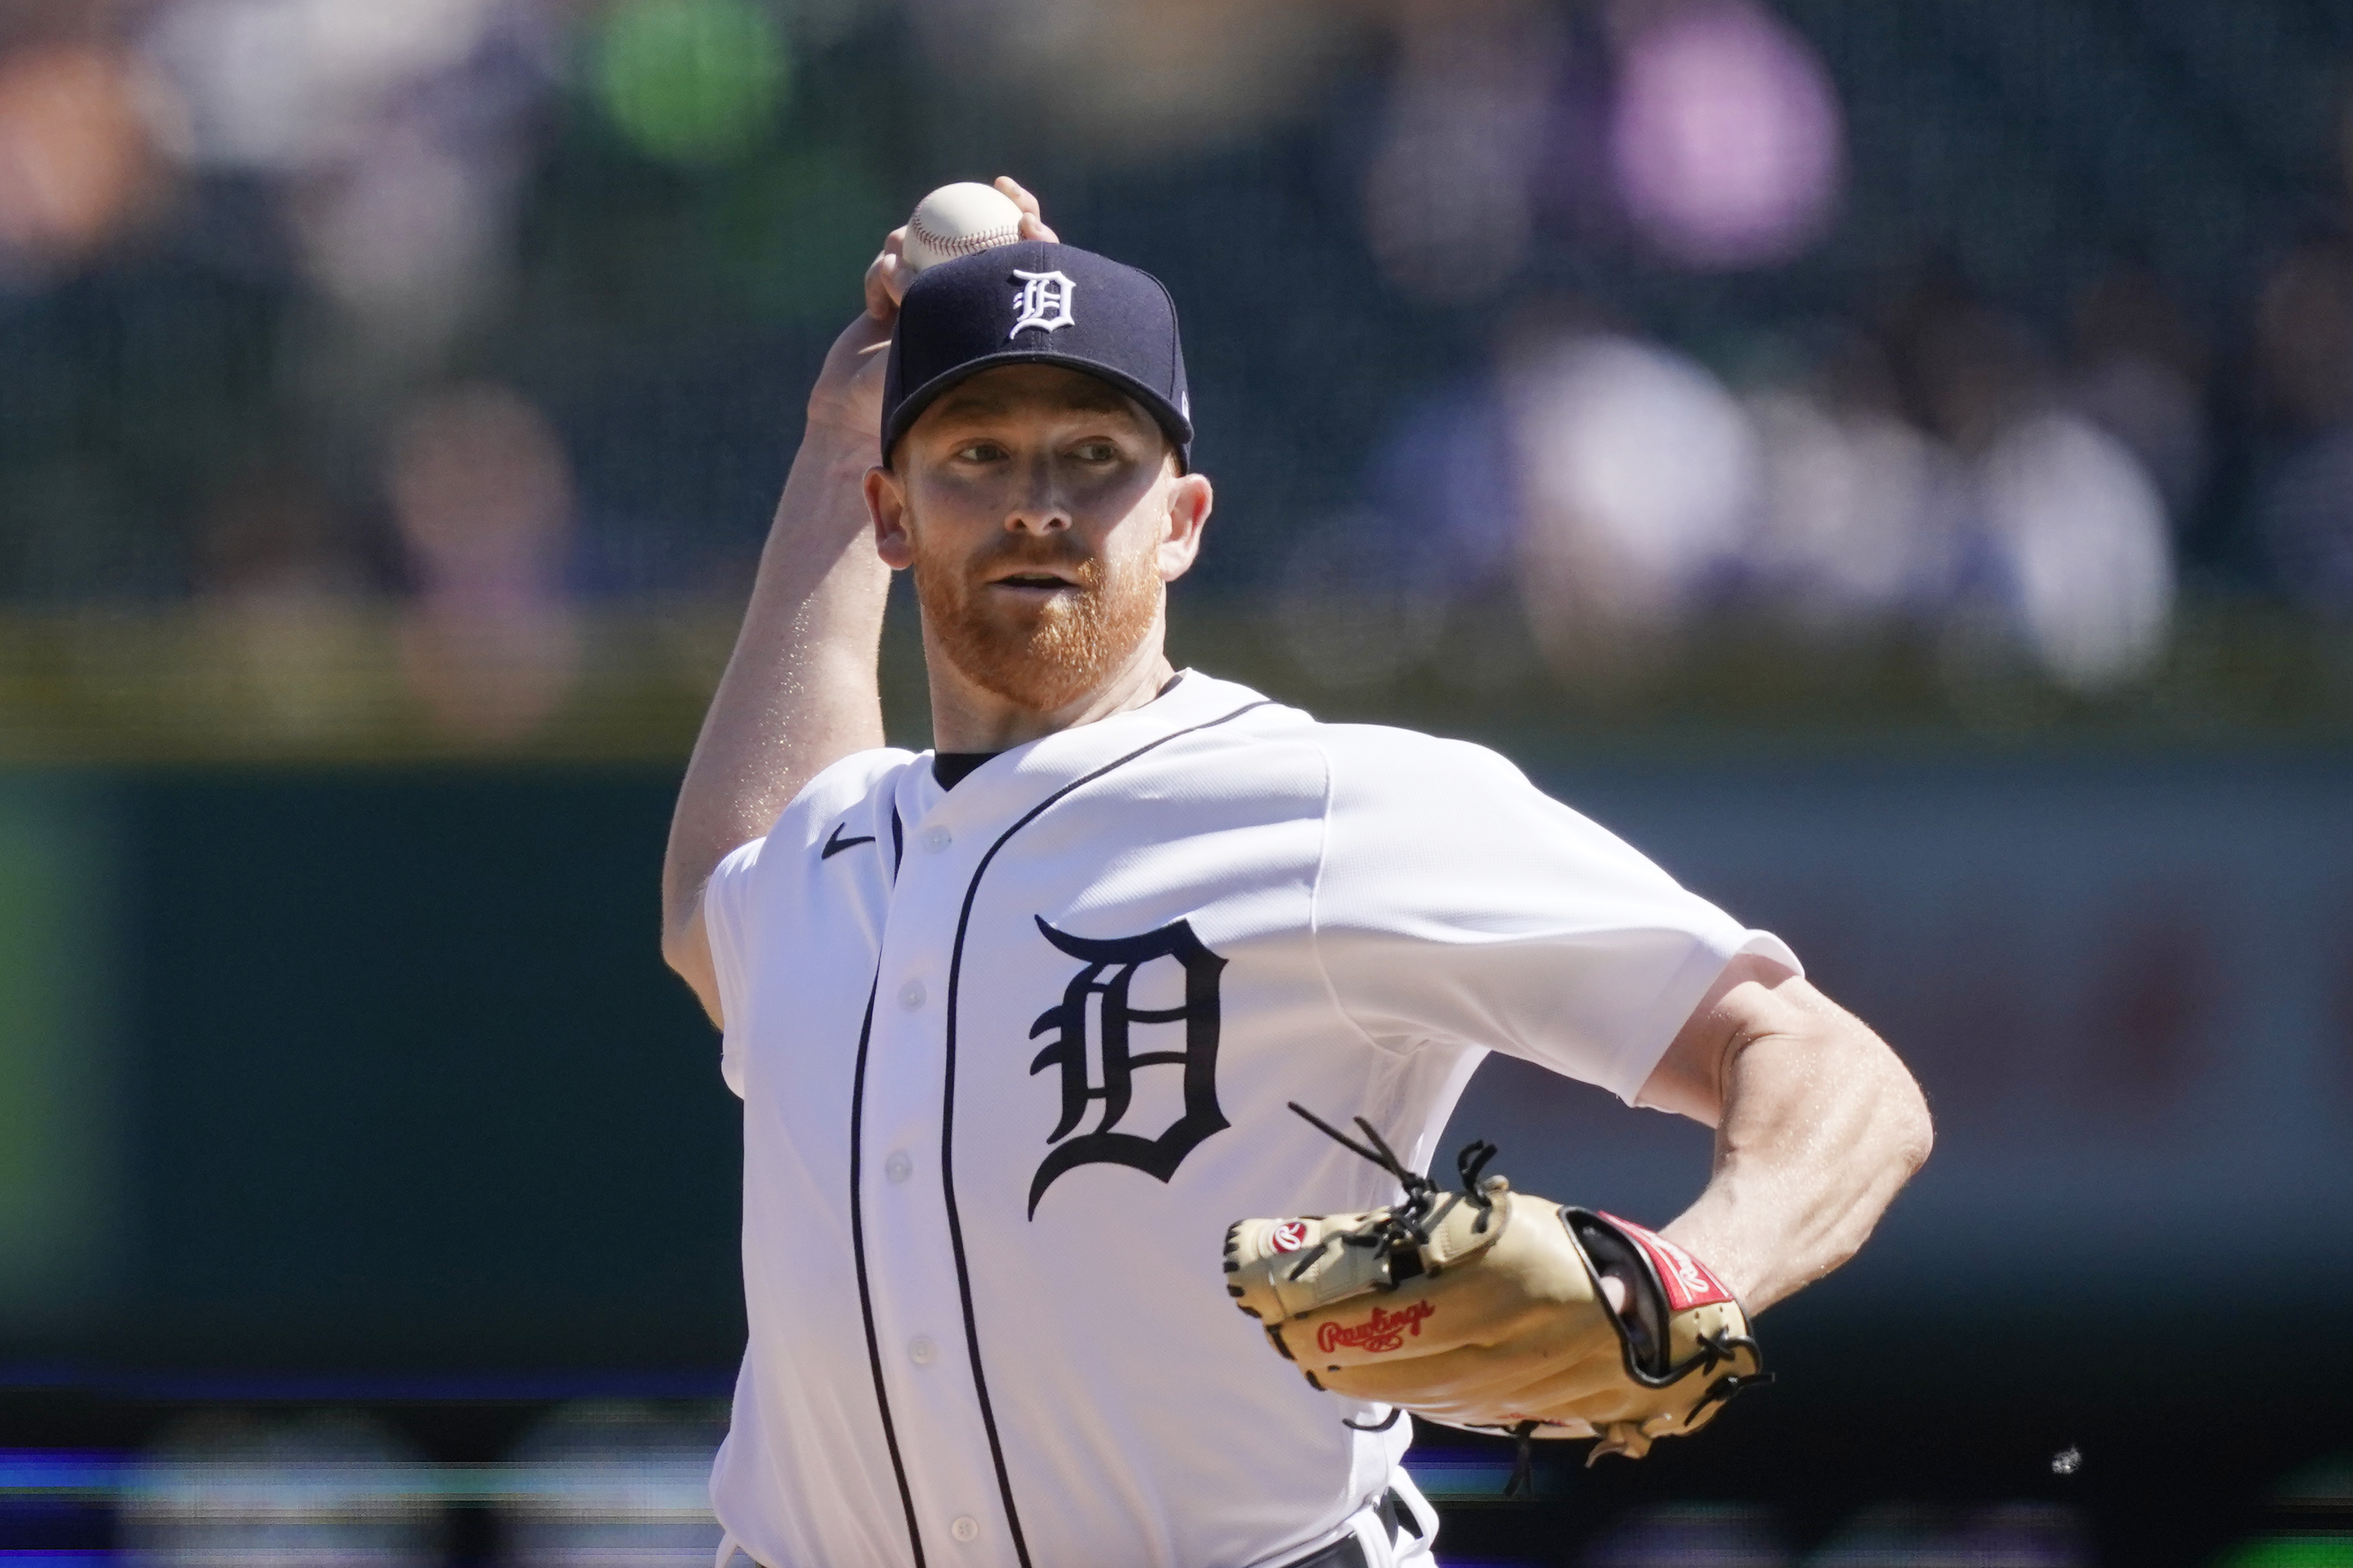 Spencer Turnbull back with Tigers, on IL with neck discomfort - ESPN